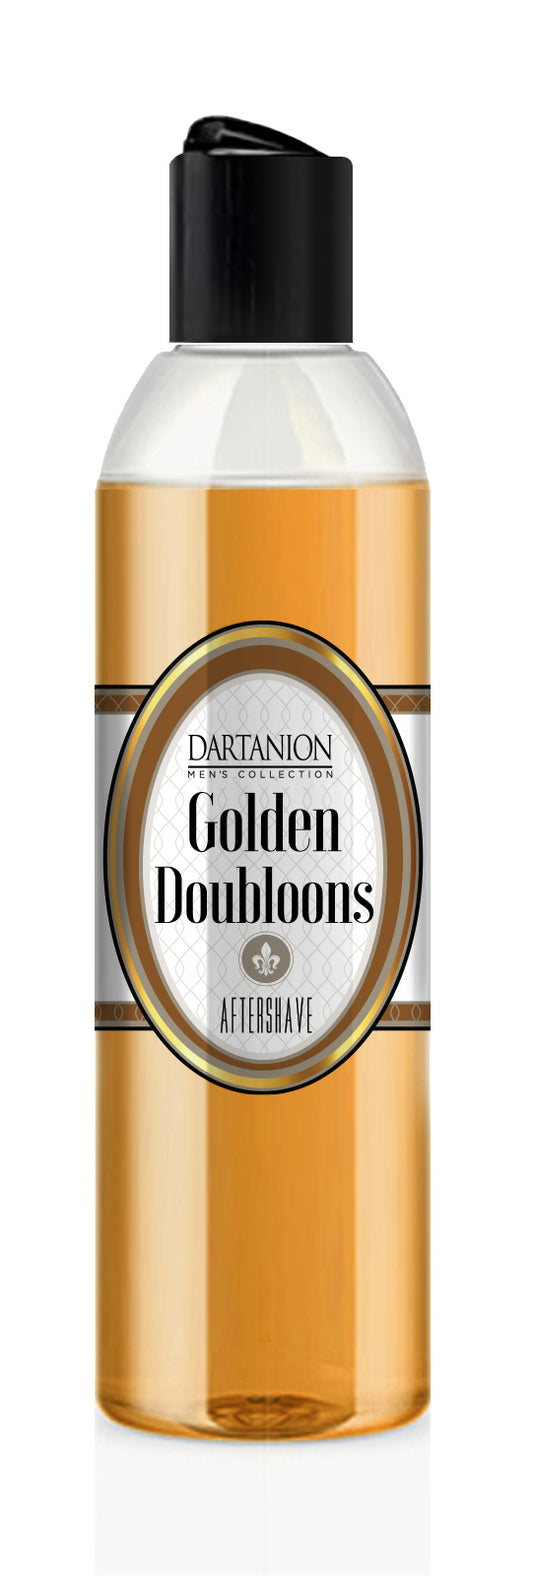 Dartanion Men’s Collection “Golden Doubloons” aftershave